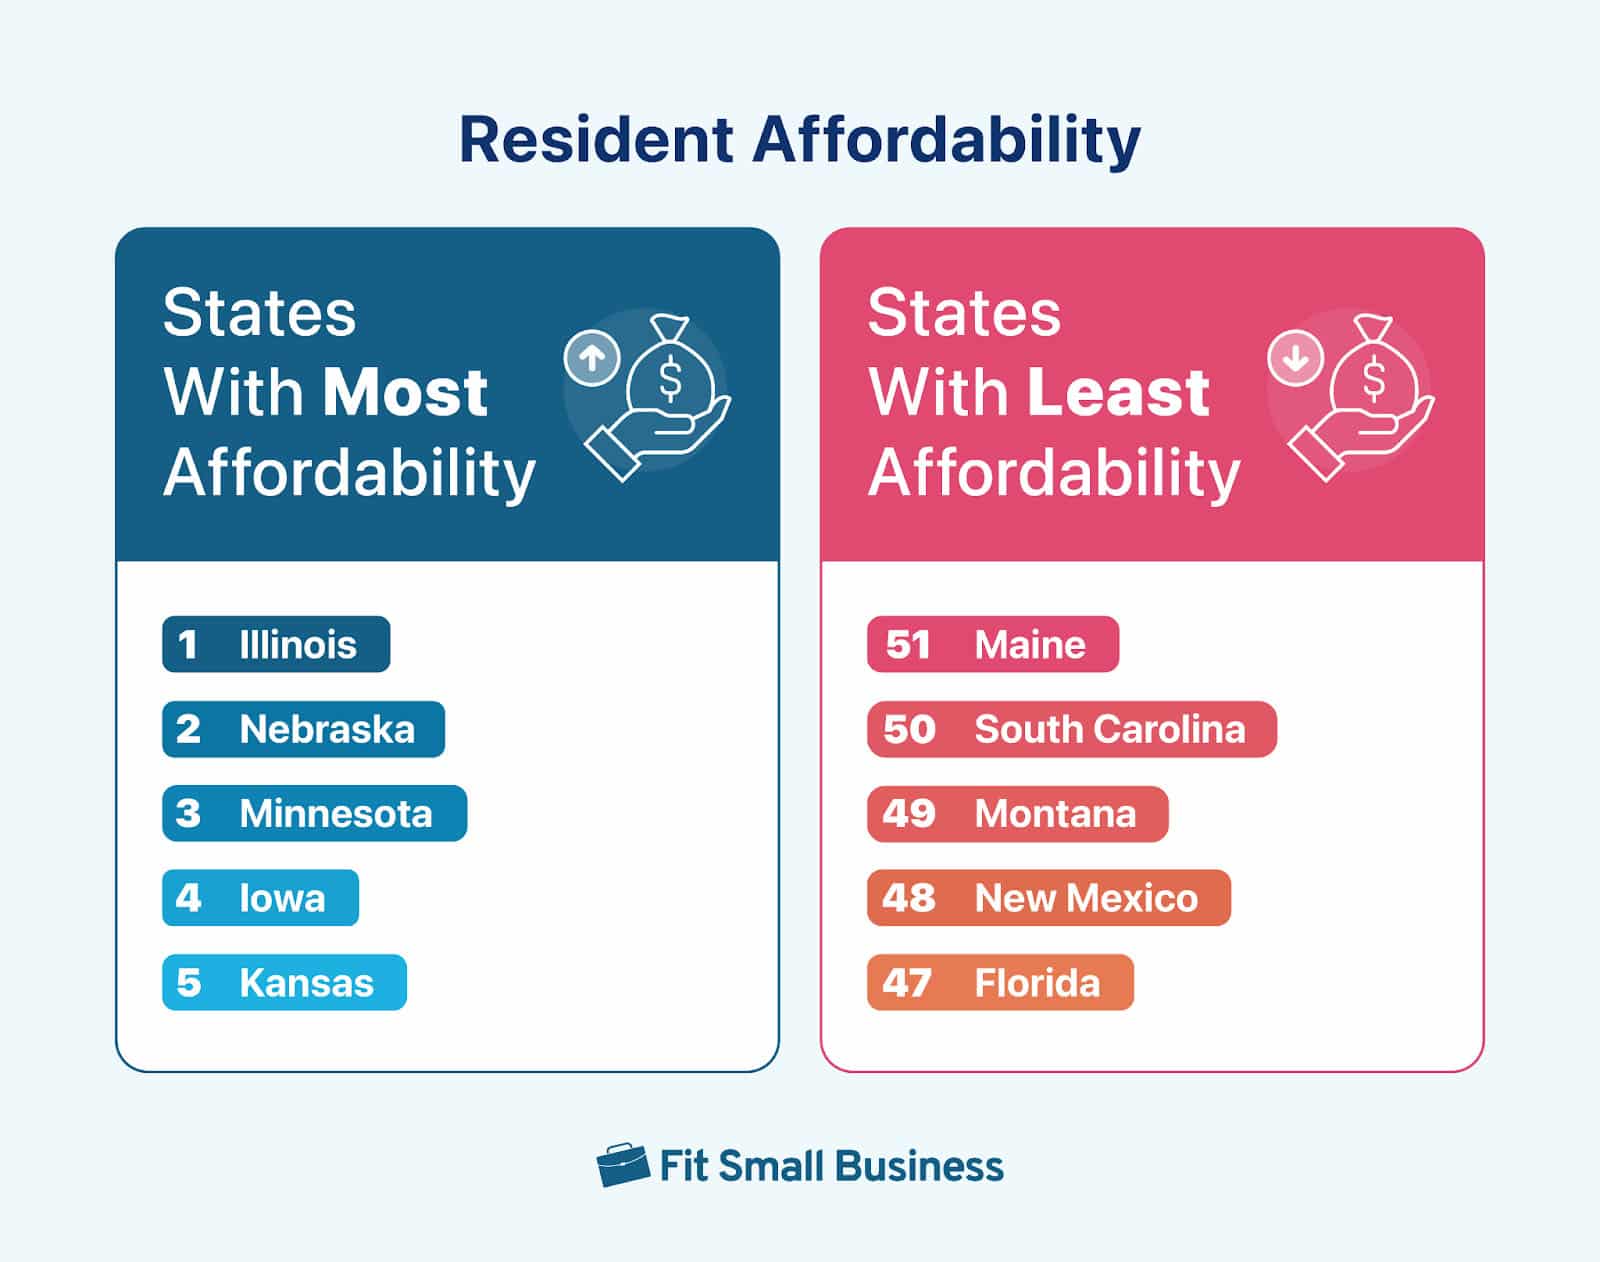 Five best and worst states for resident affordability. 